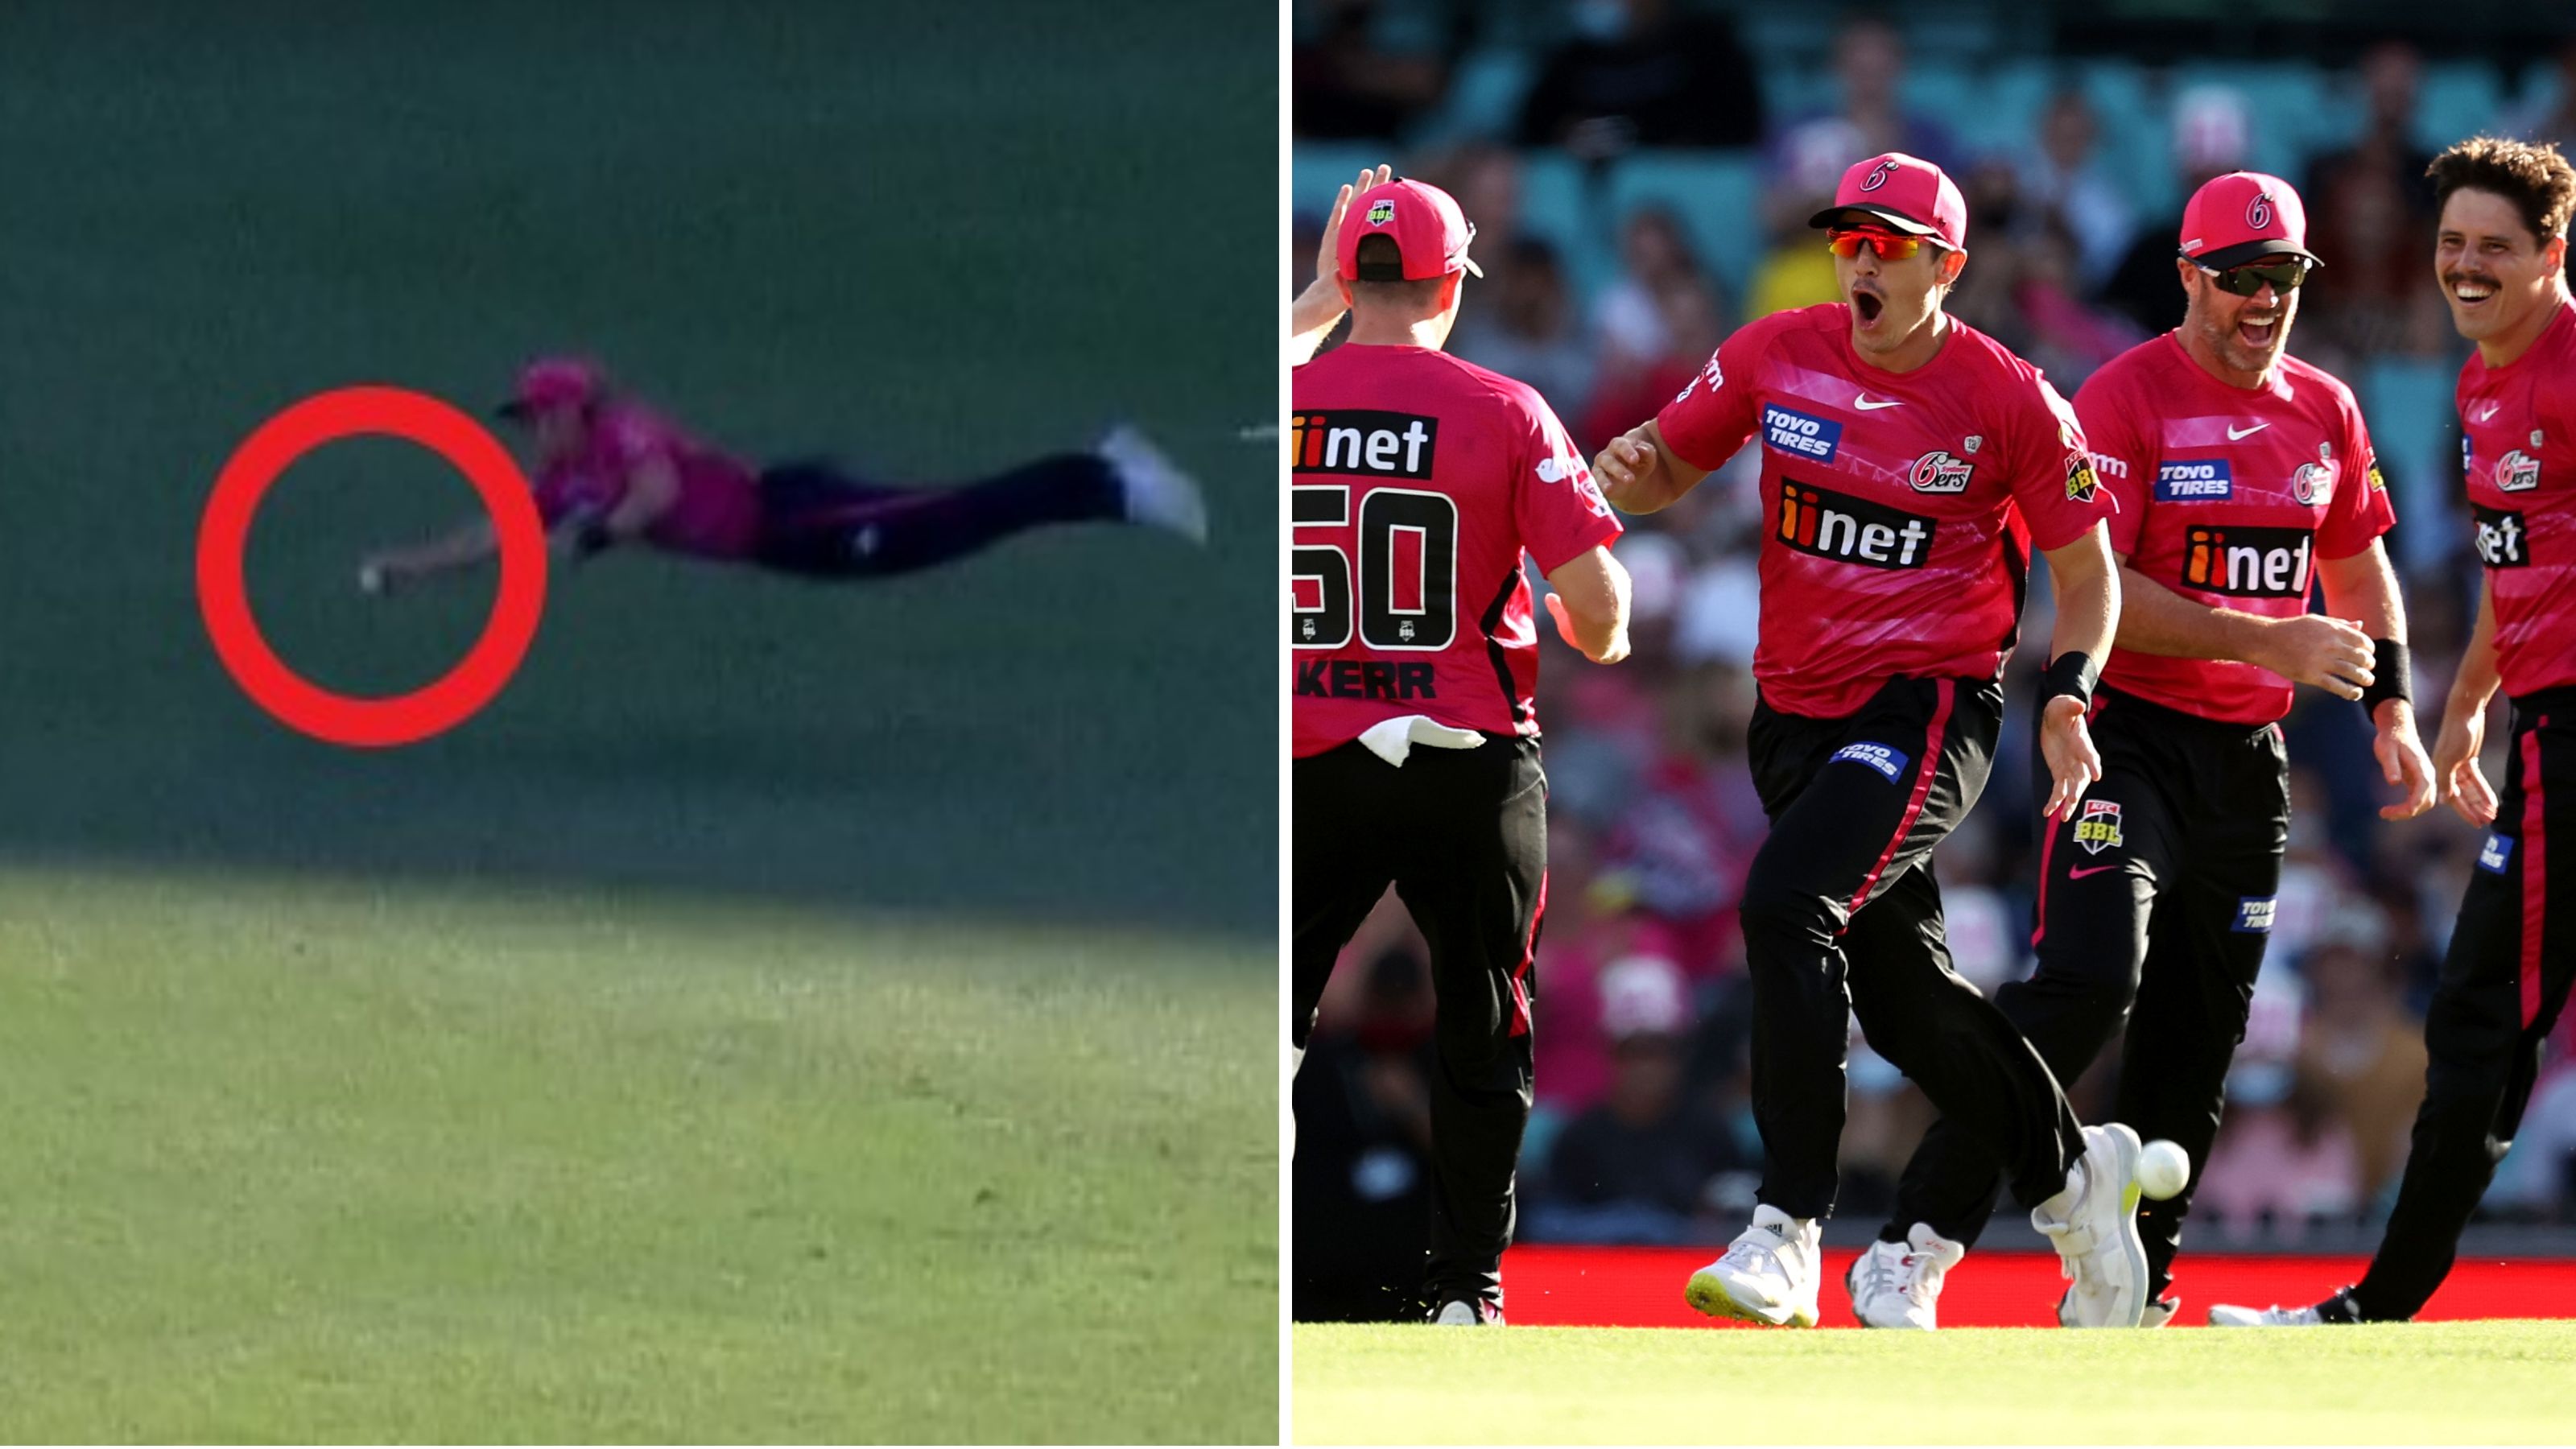 'Superman' stuns BBL with incredible flying act